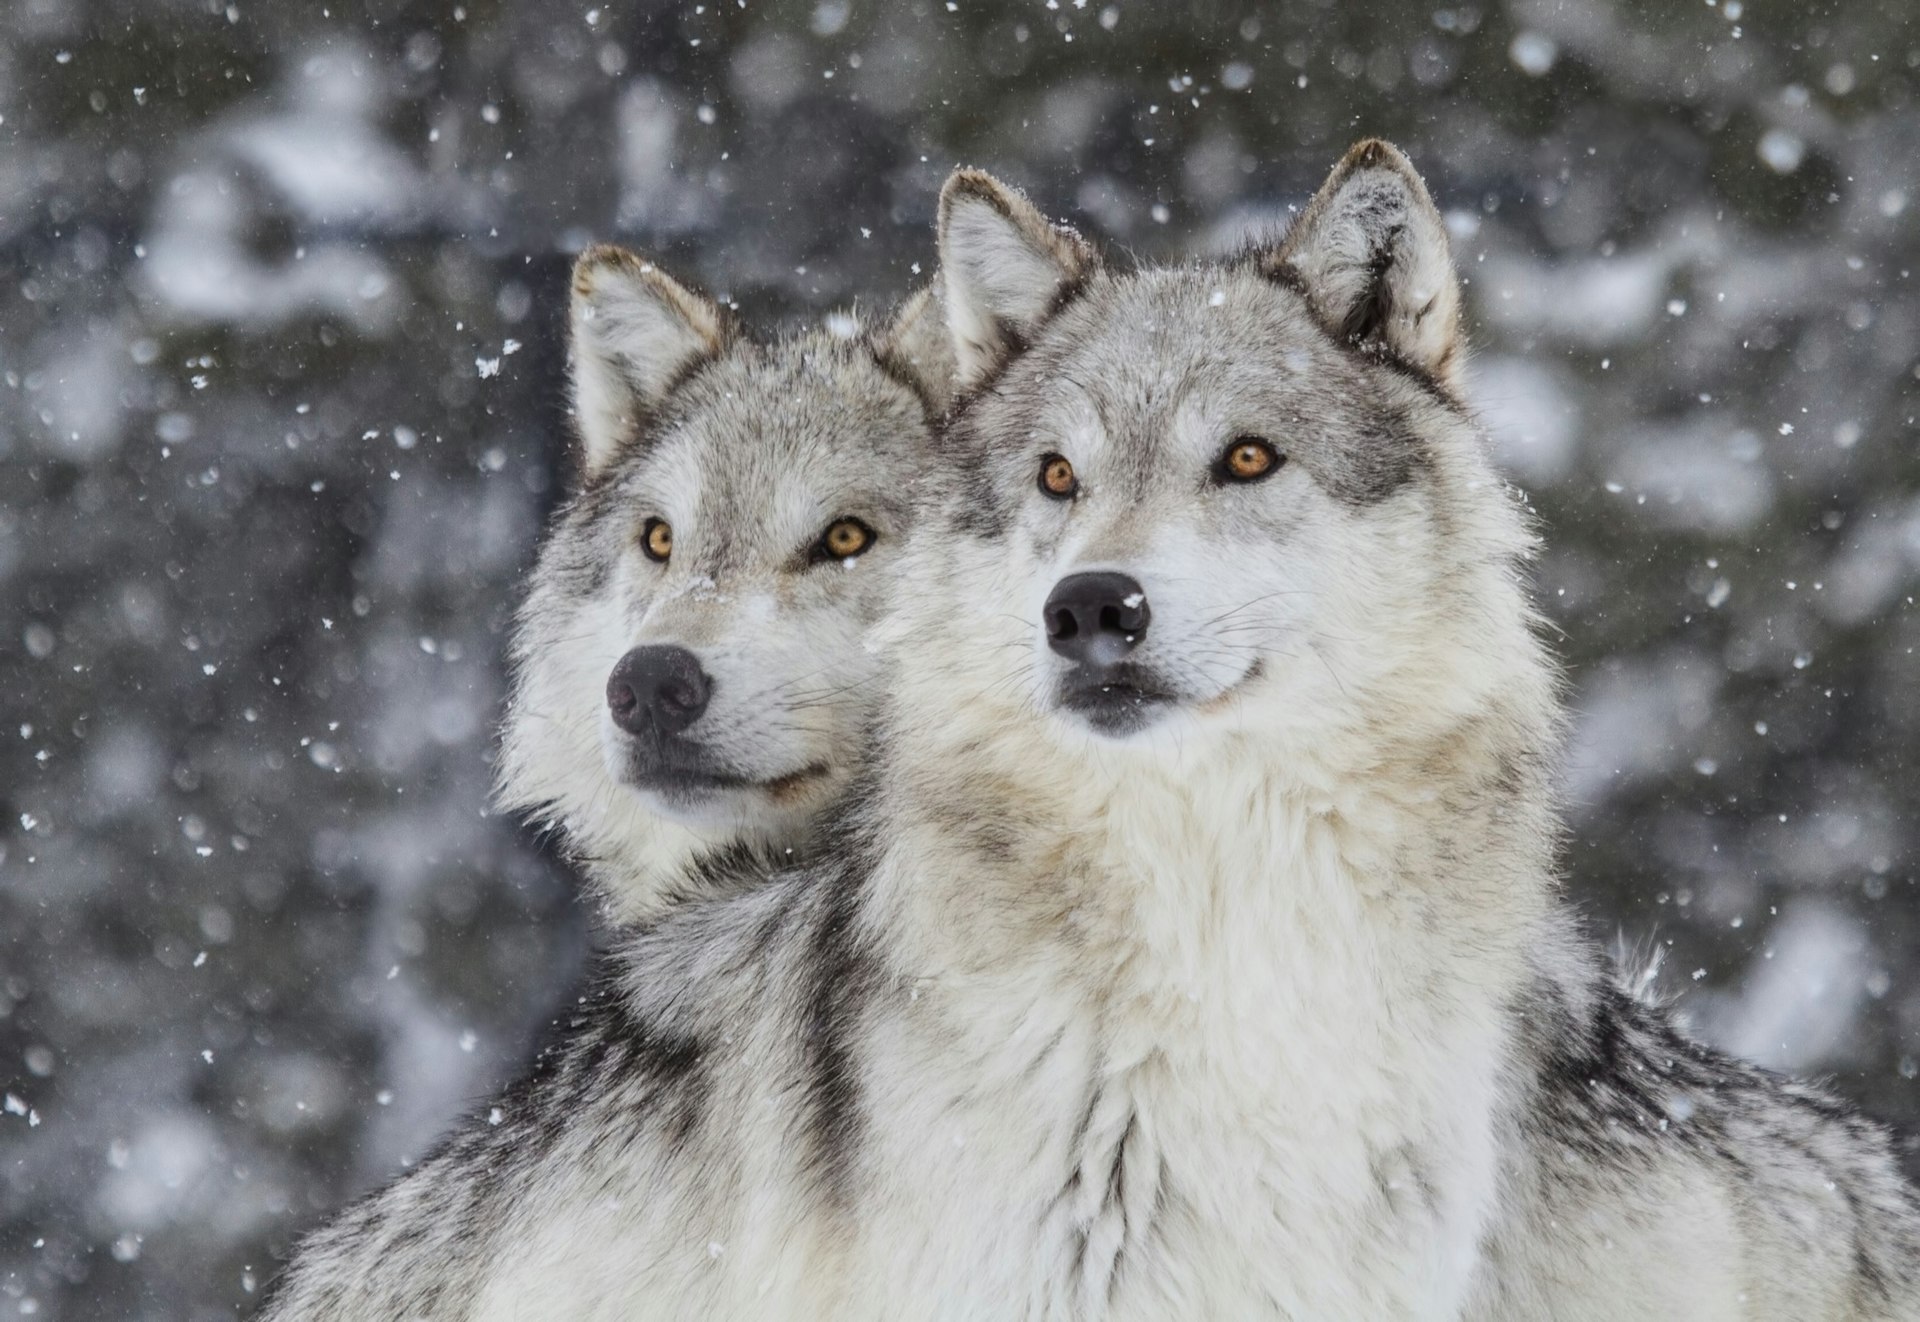 Snow falls around two gray wolves with bright yellow eyes